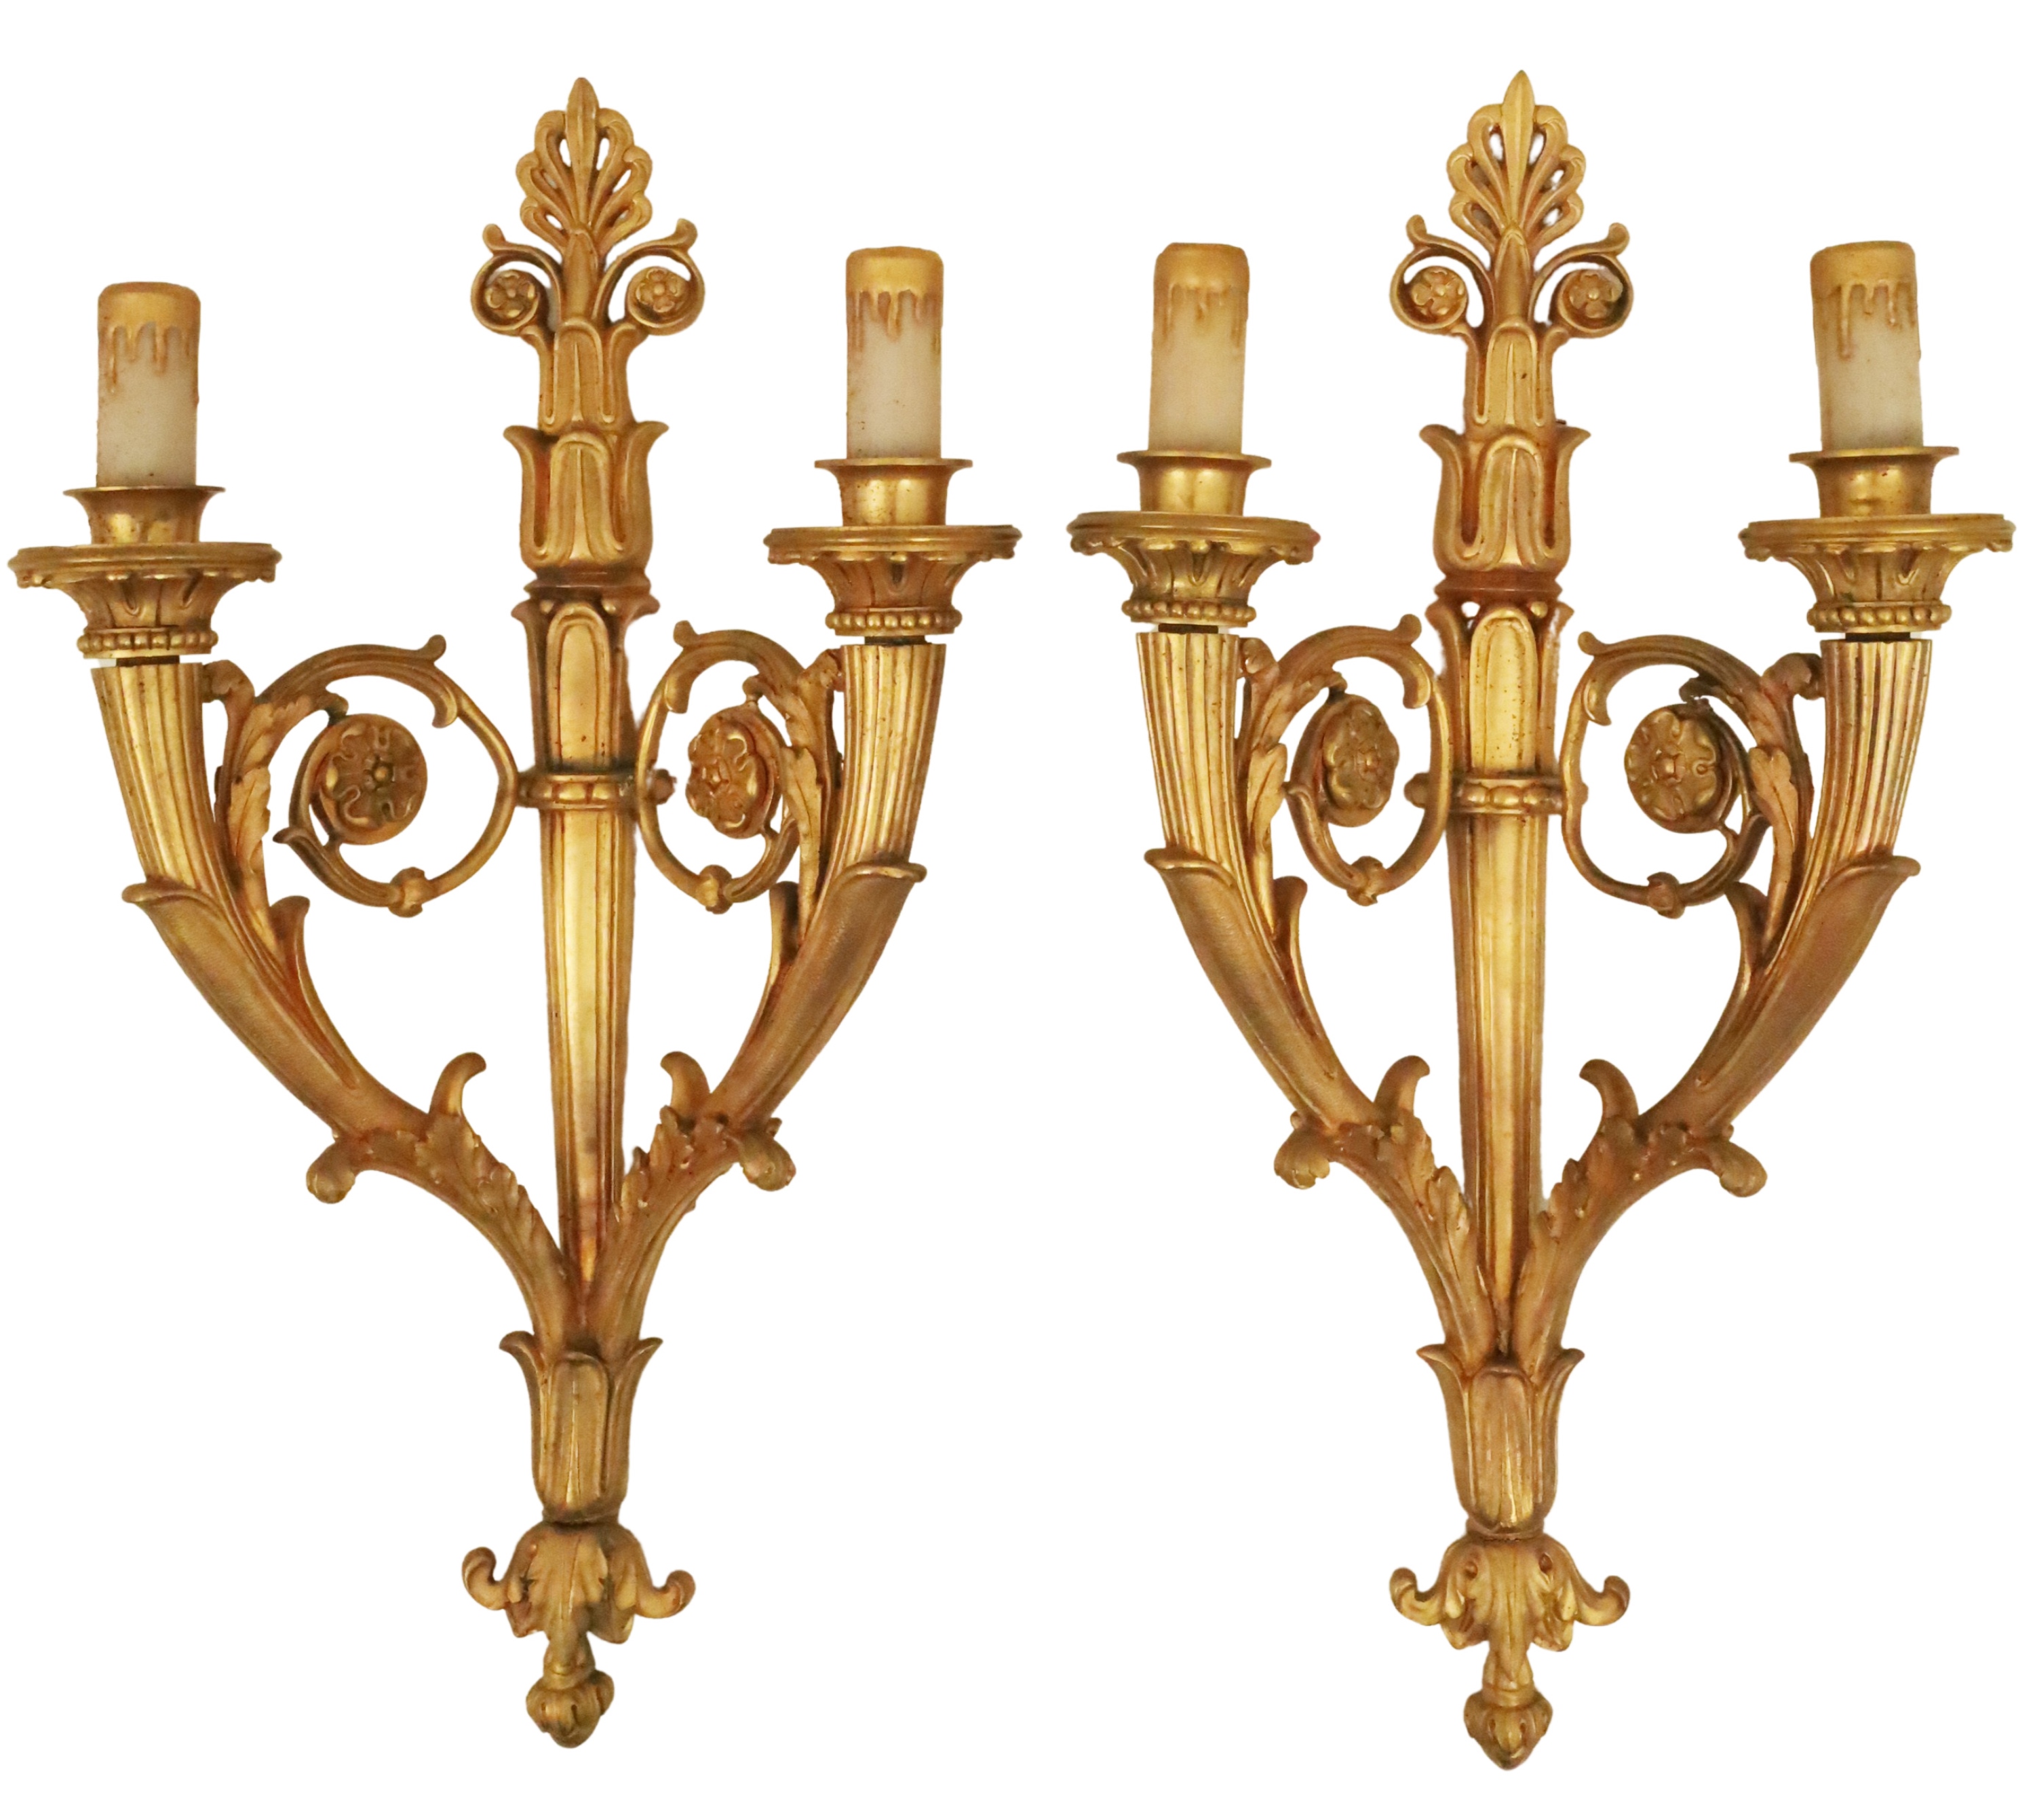 PR OF FRENCH LOUIS XV STYLE GILT 2a5851